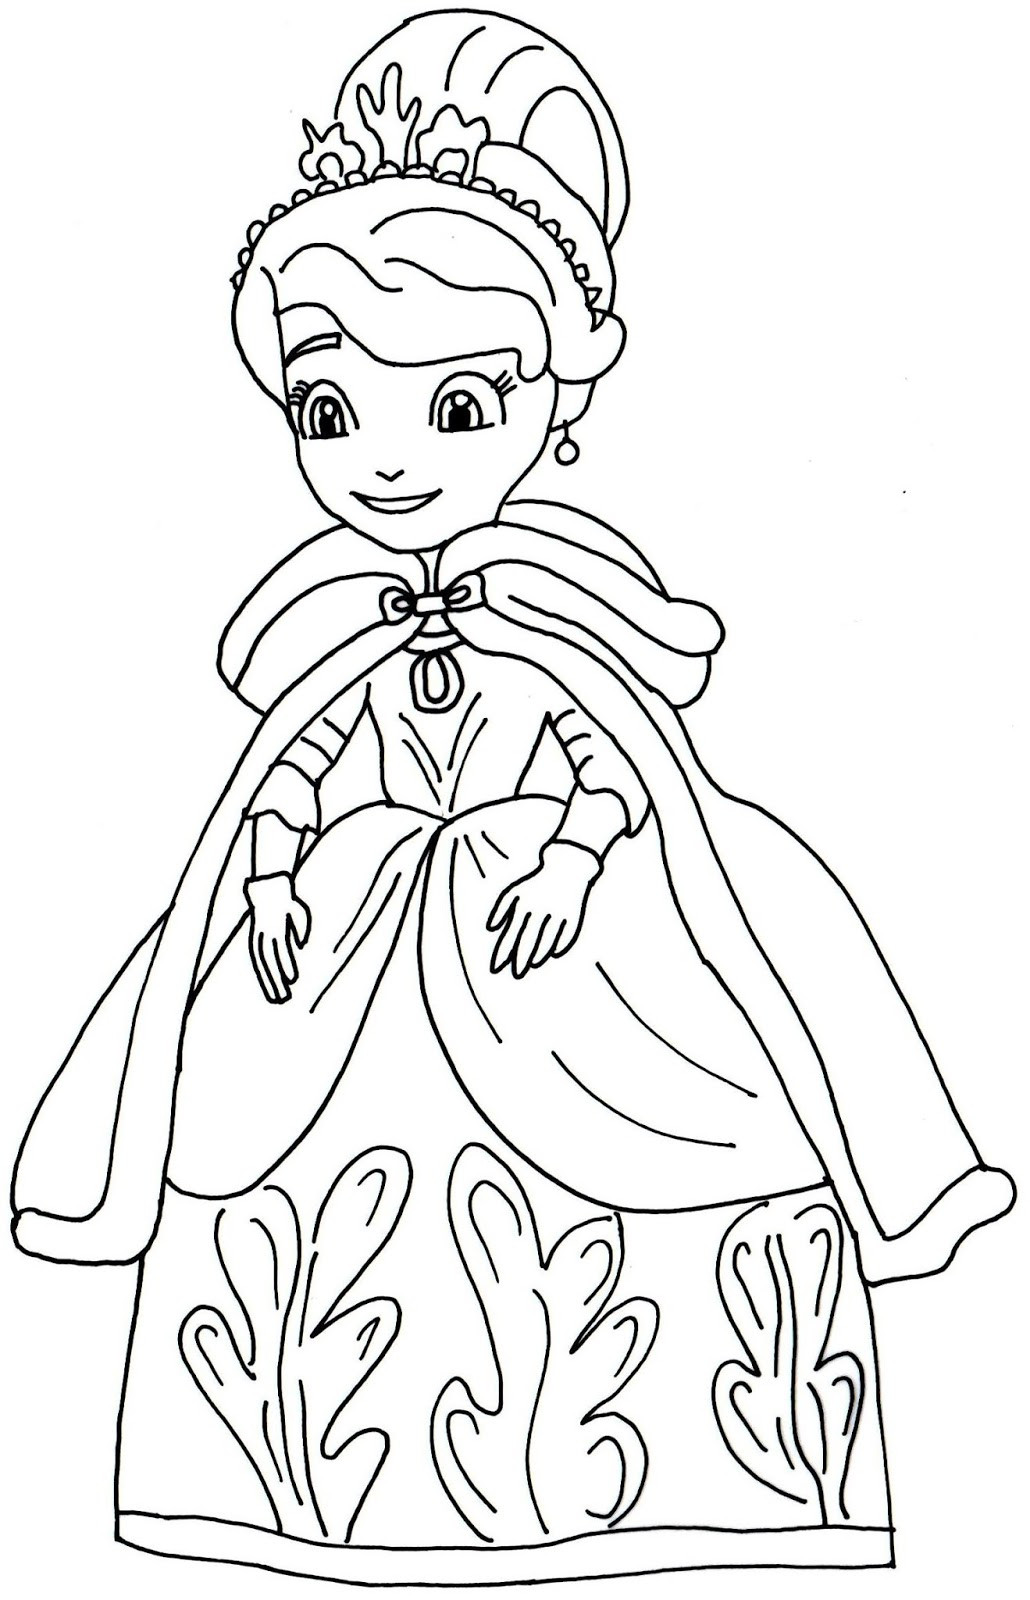 coloring pages of sofia the first 444045 hd wallpaper backgrounds download.